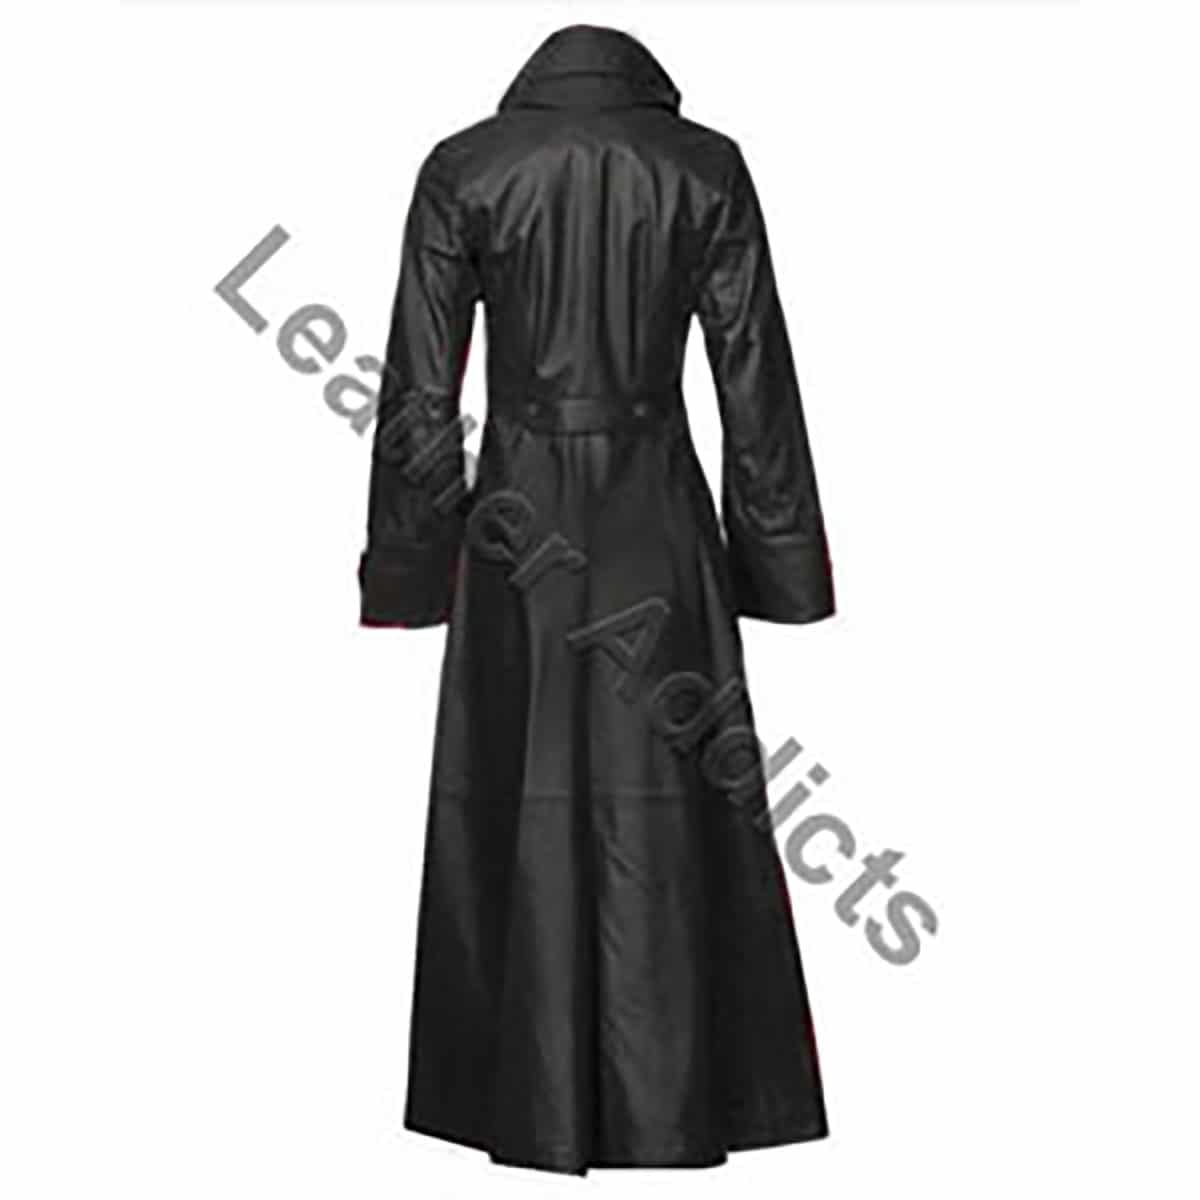 Womens Black Leather Steampunk Goth Vampire Style Coat - T6